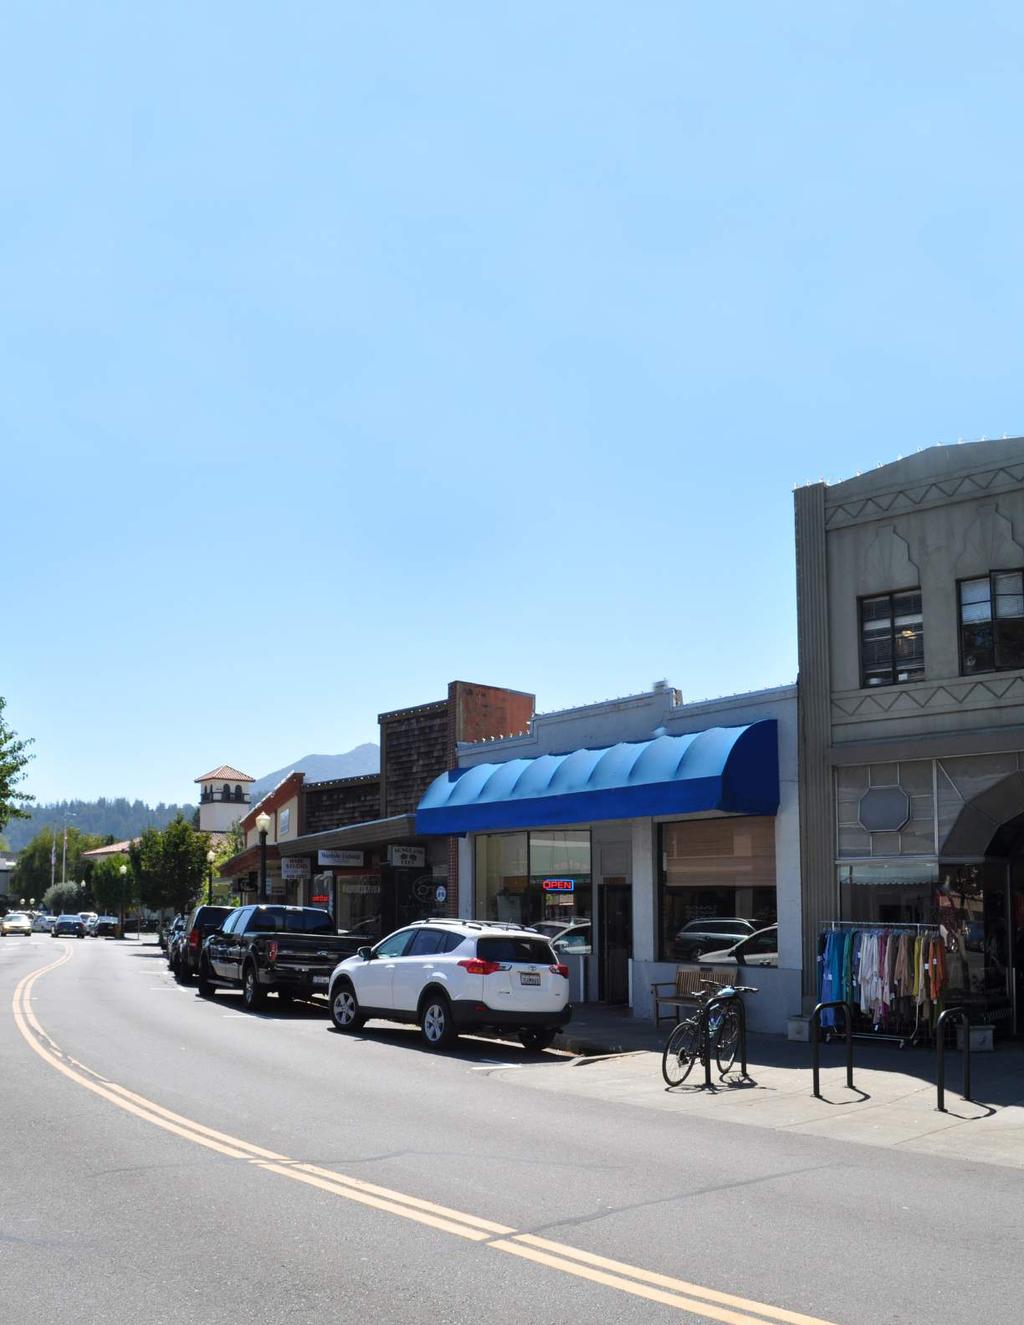 FOR SALE FOR LEASE 625 SAN ANSELMO AVE $1,95,. 4,233 Sq. Ft.